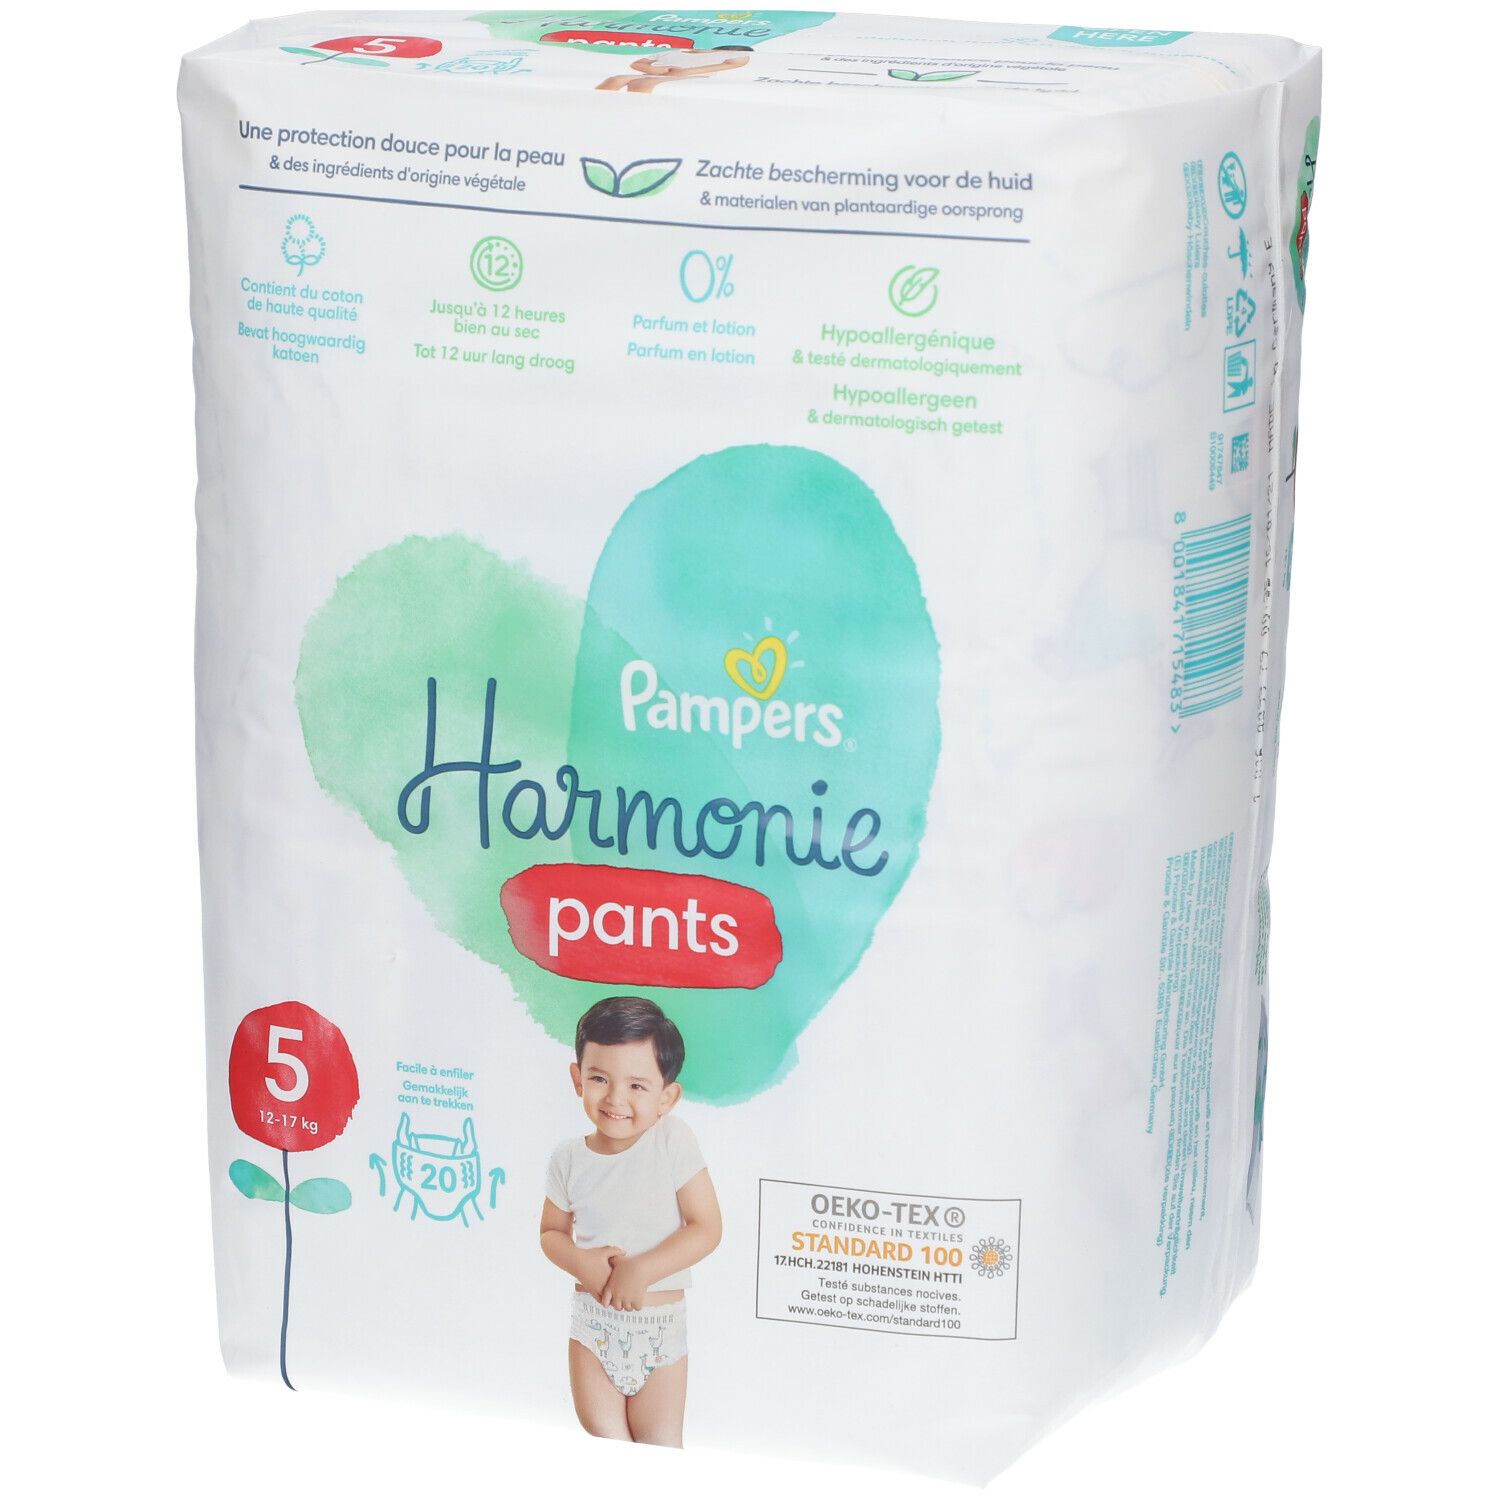 Pampers® Harmonie Pants Couches-culottes Taille 5, 12-17 kg